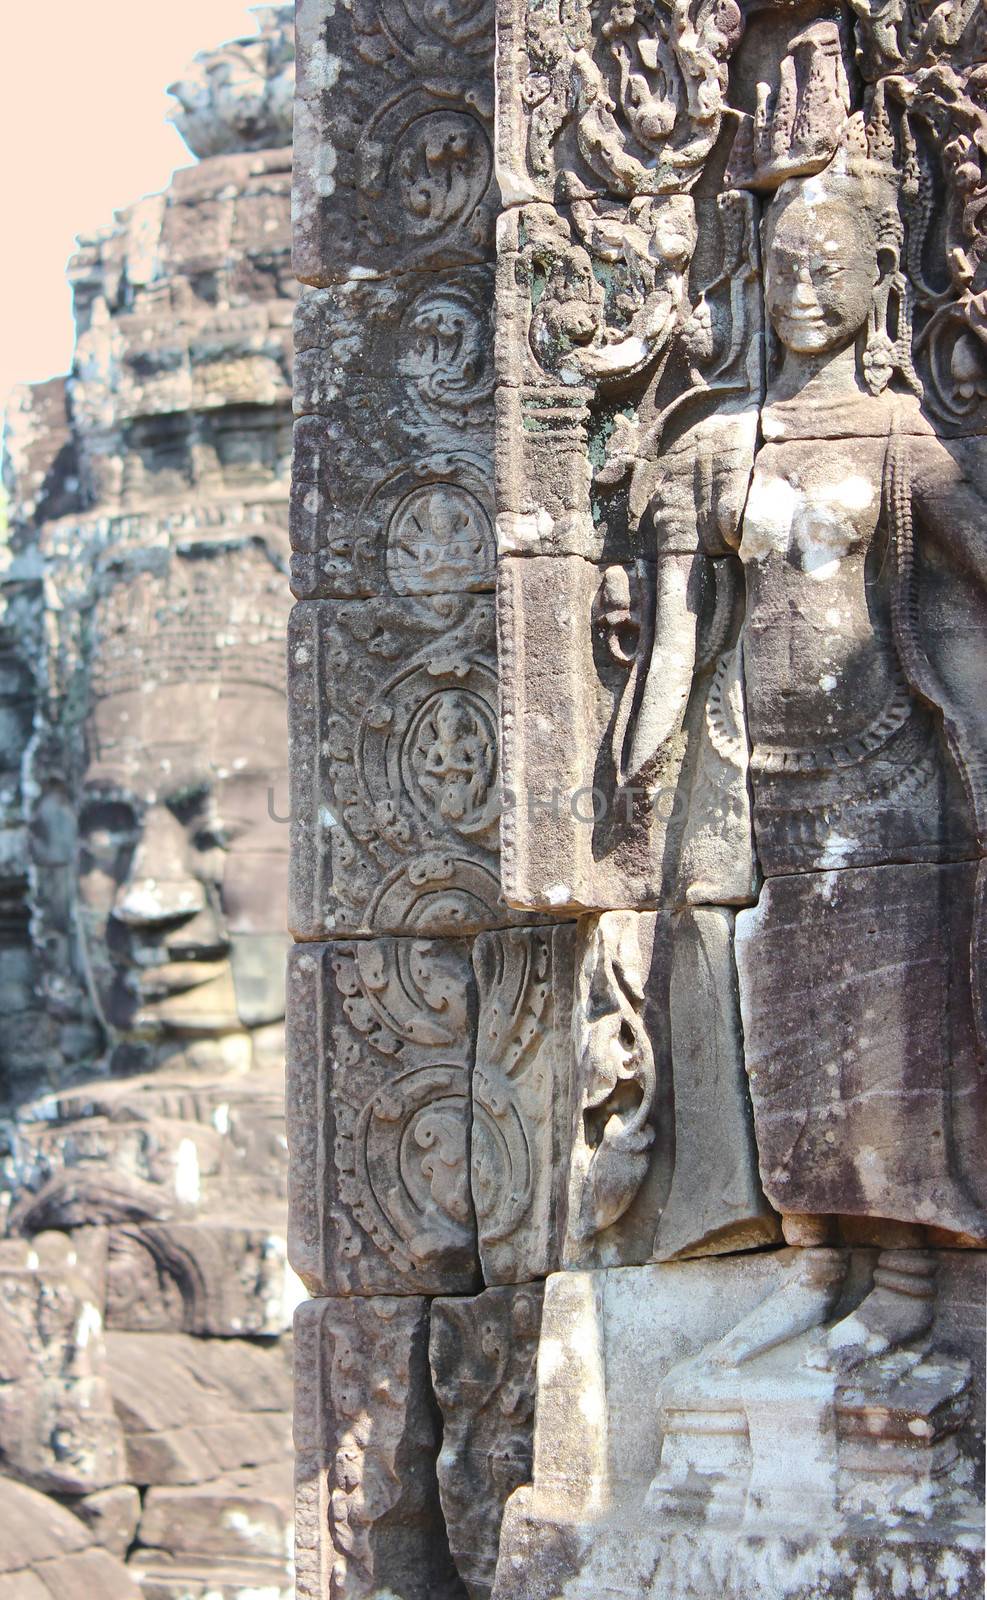 Relief in the temple of Bayon by tboyajiev